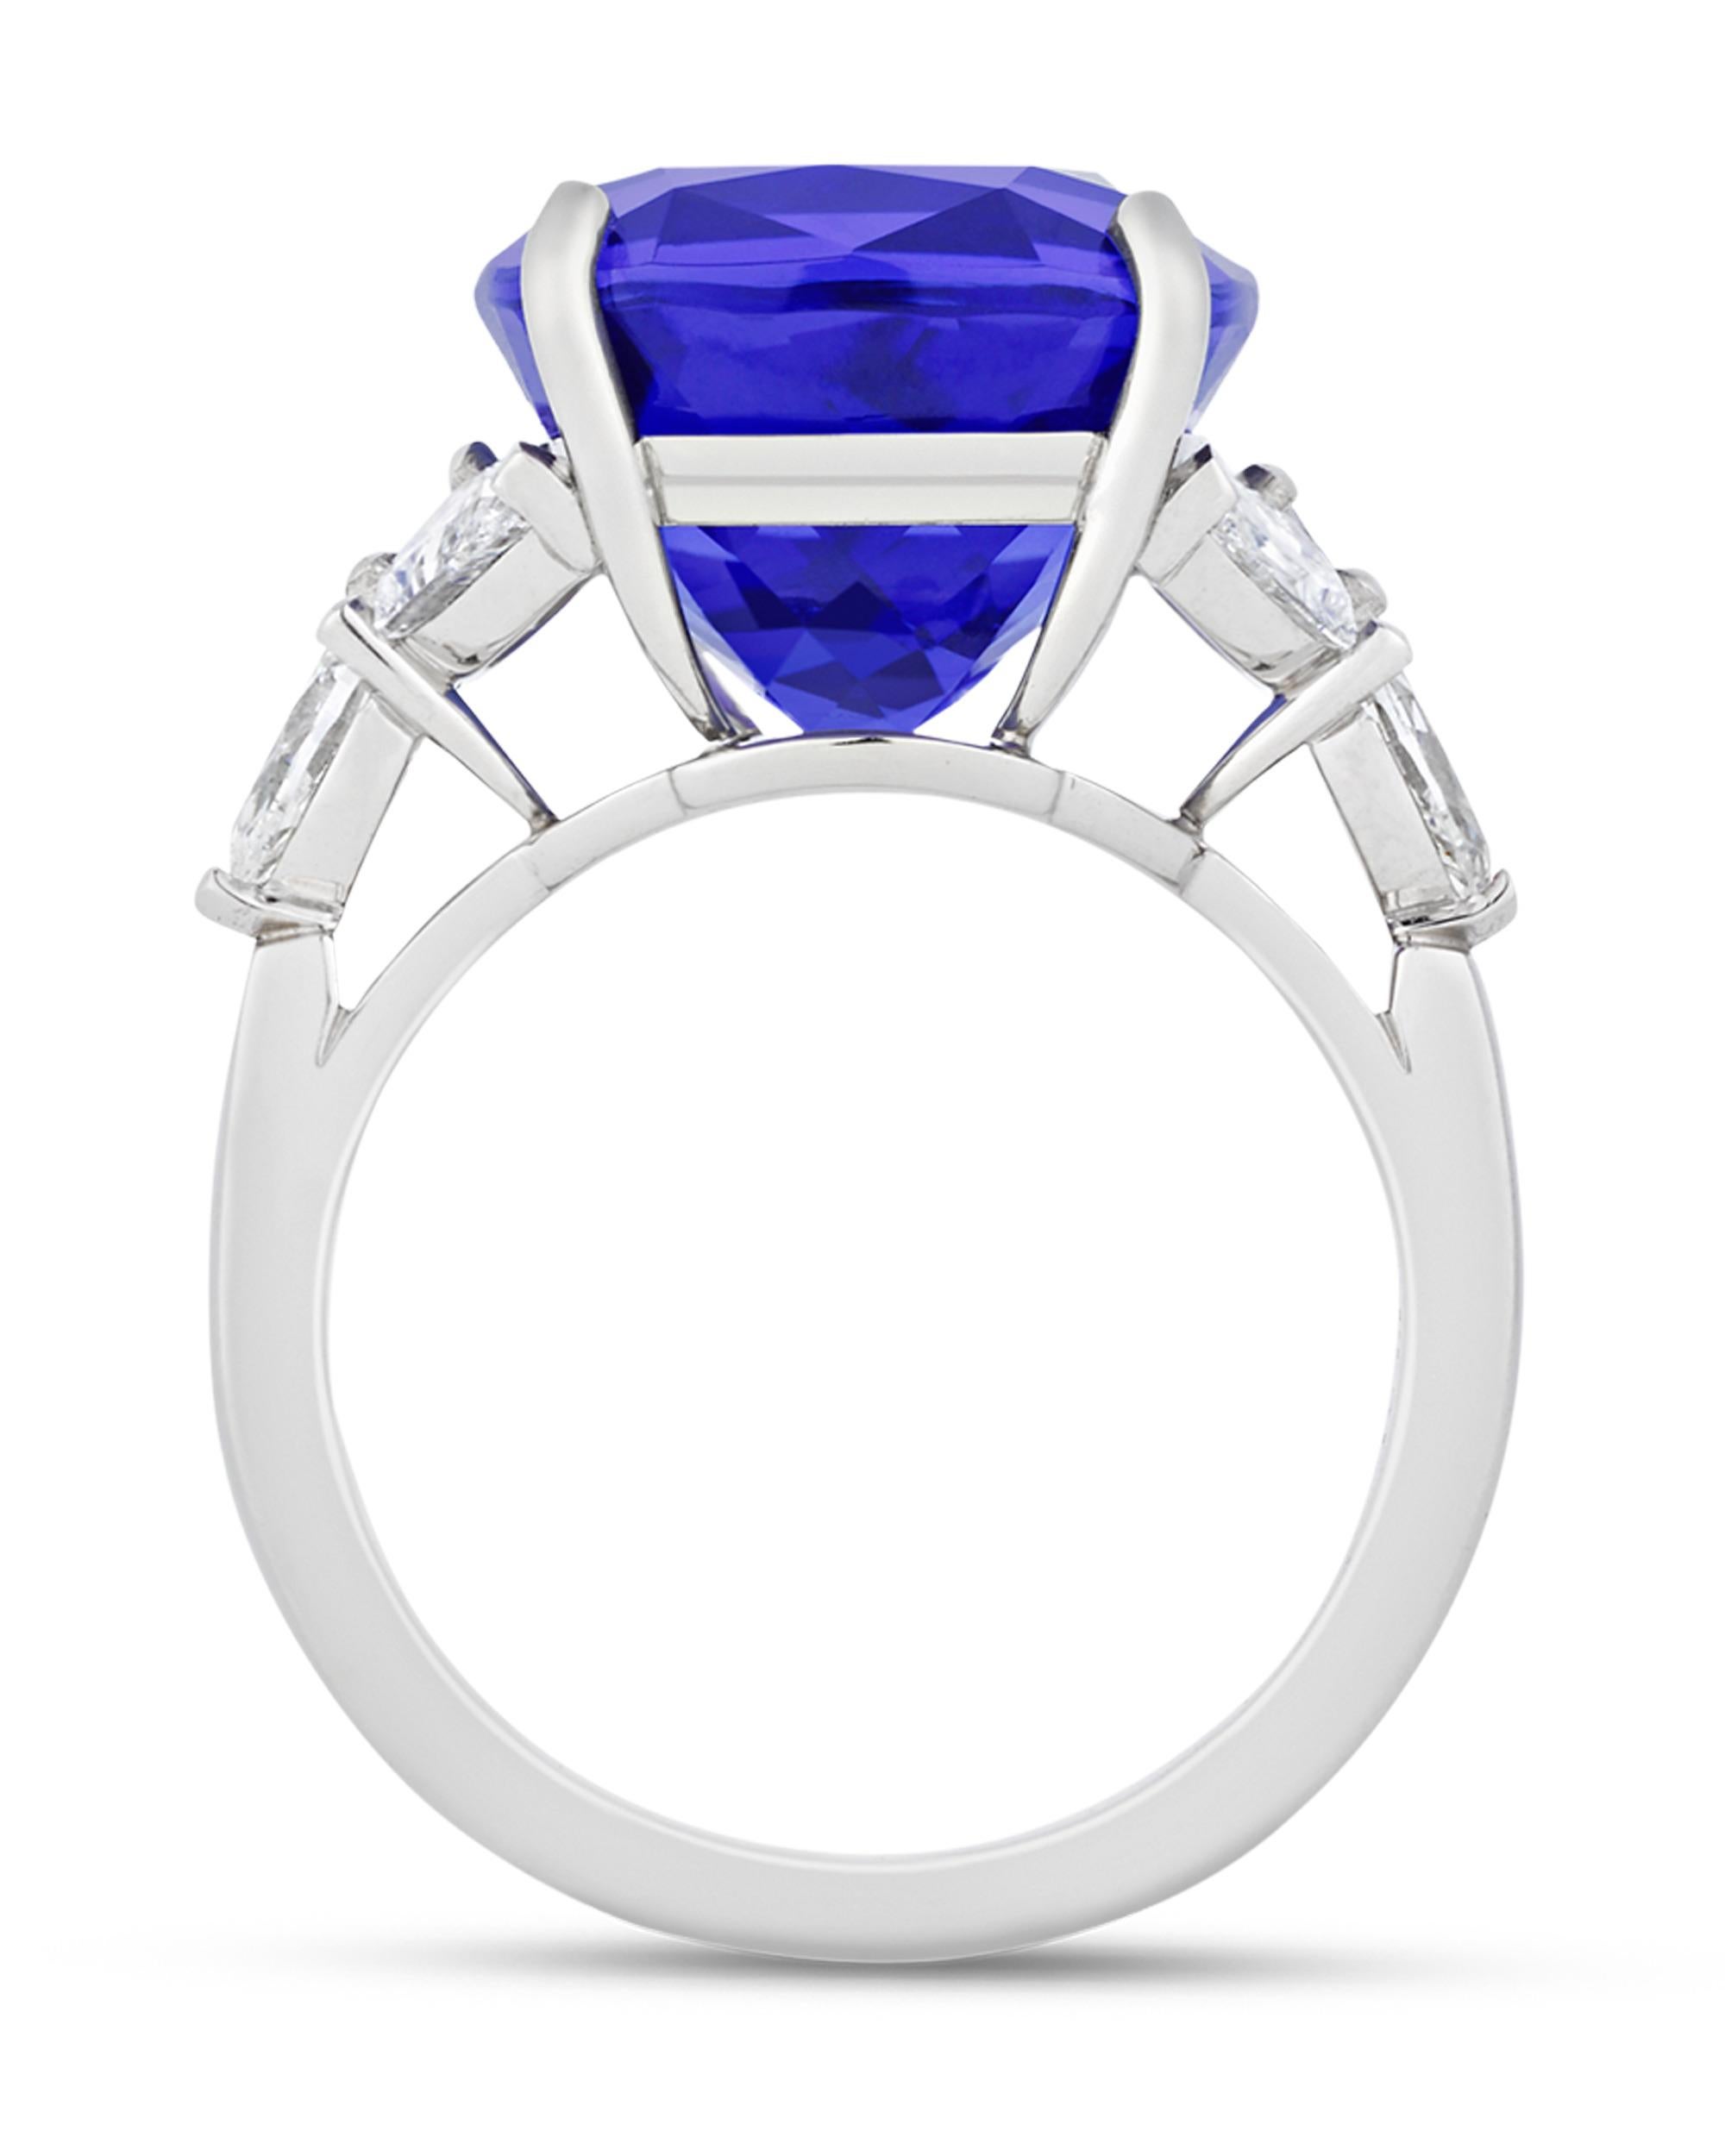 This cushion-cut tanzanite’s desirable violetish-blue hue is captivating. Certified as originating in Tanzania, the gem is joined by 1.39 carats of pear-shaped white diamonds in classic platinum settings.

M.S. Rau presents a collaboration with